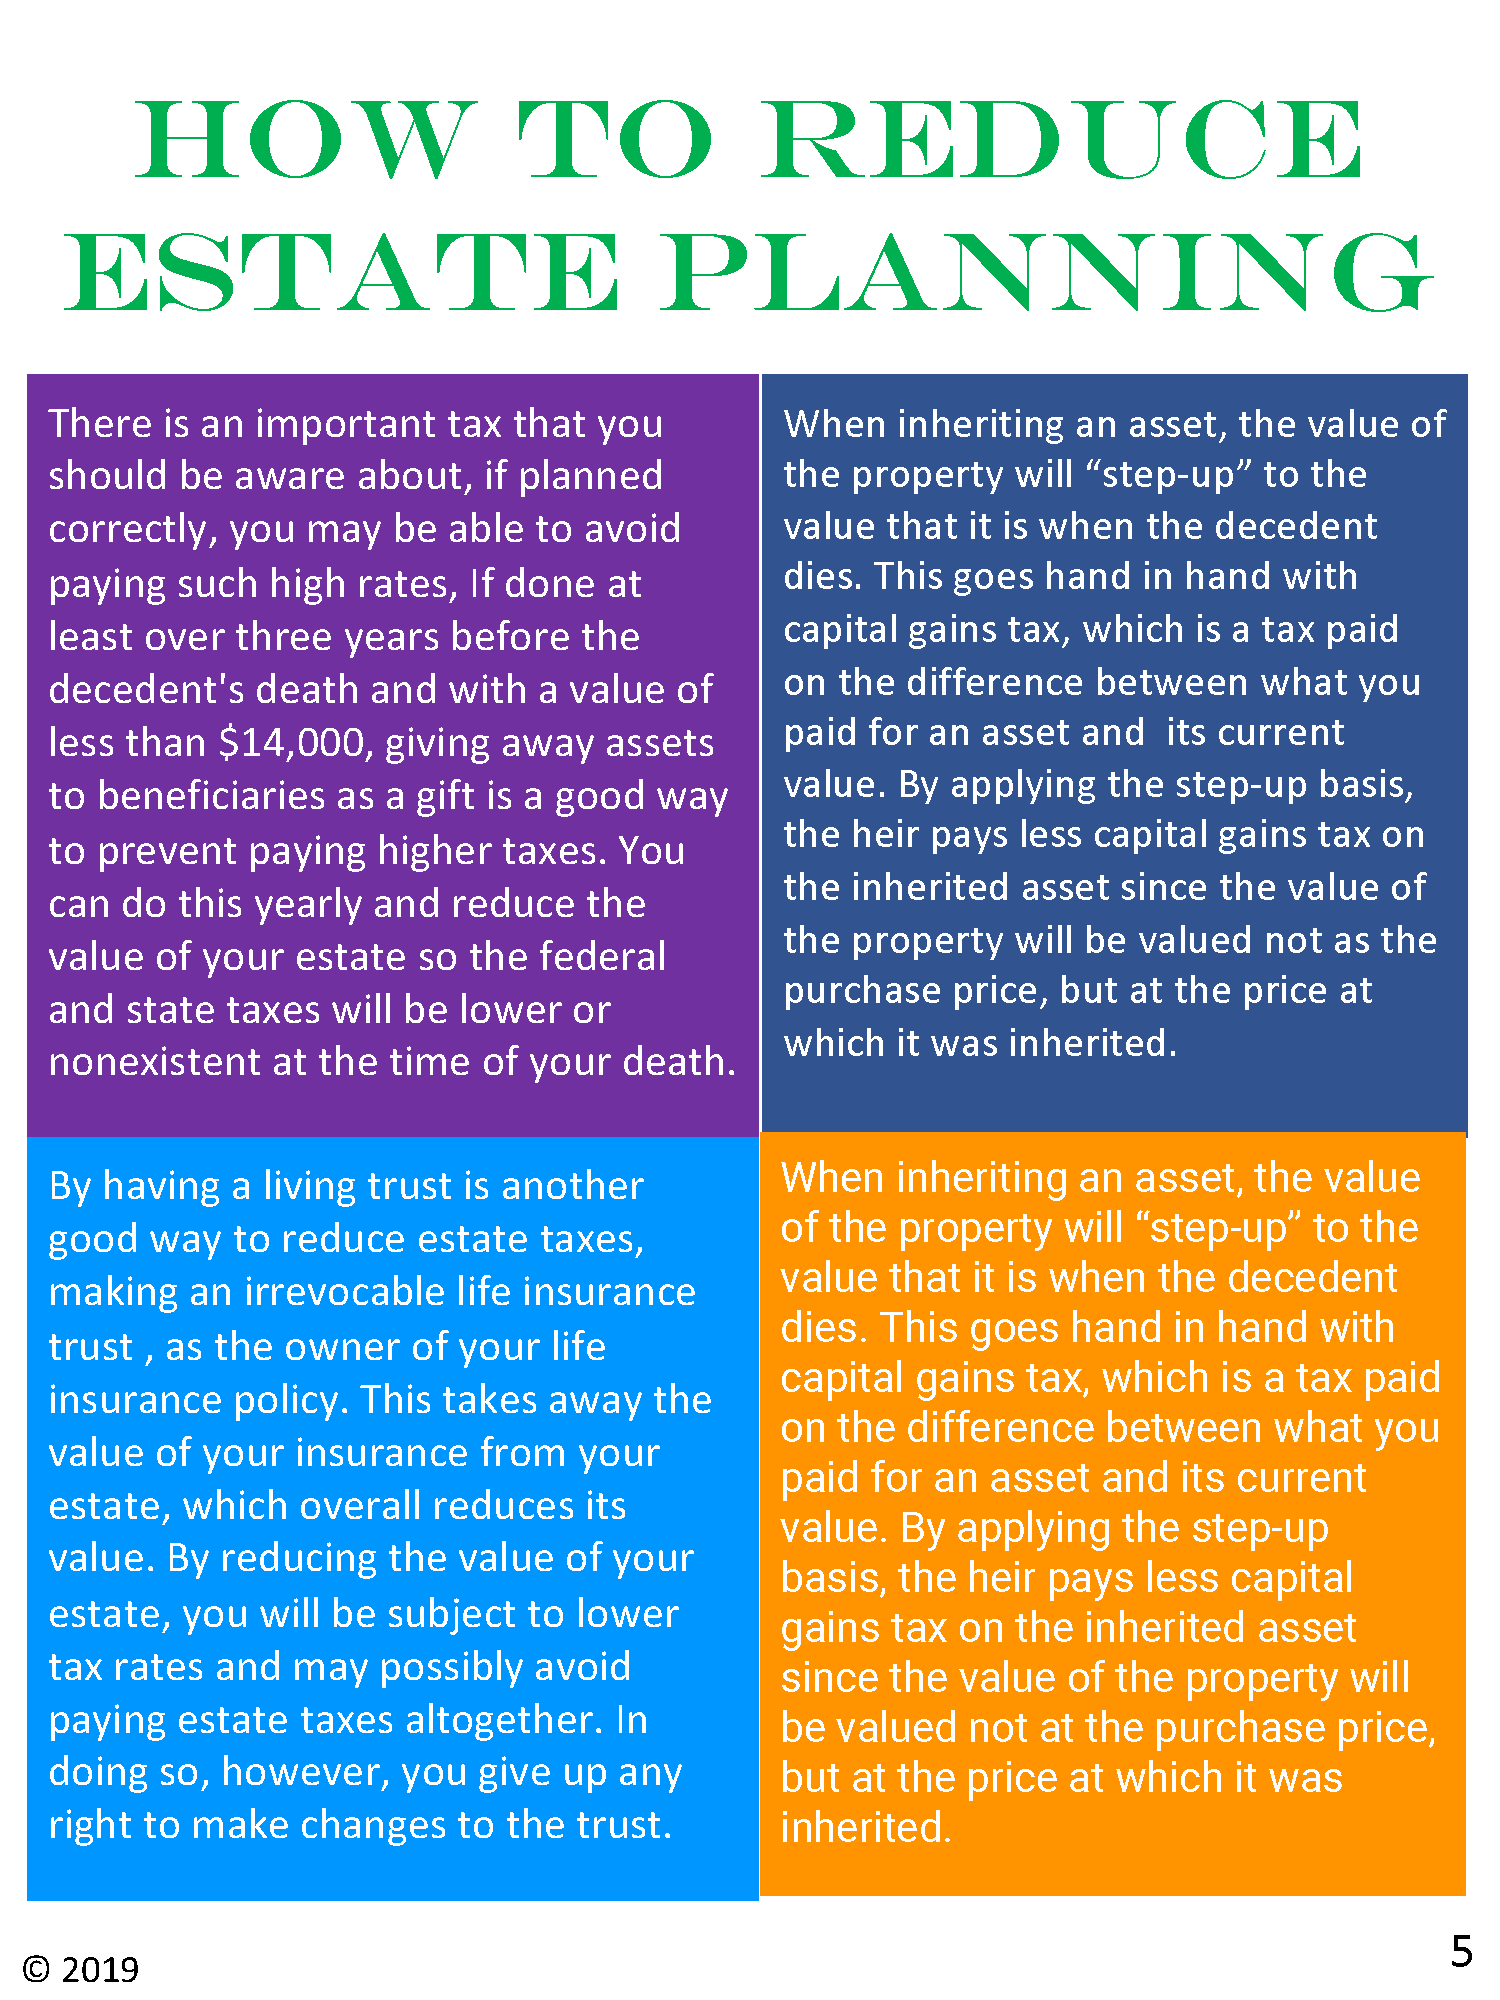 how-to-reduce-estate-planning